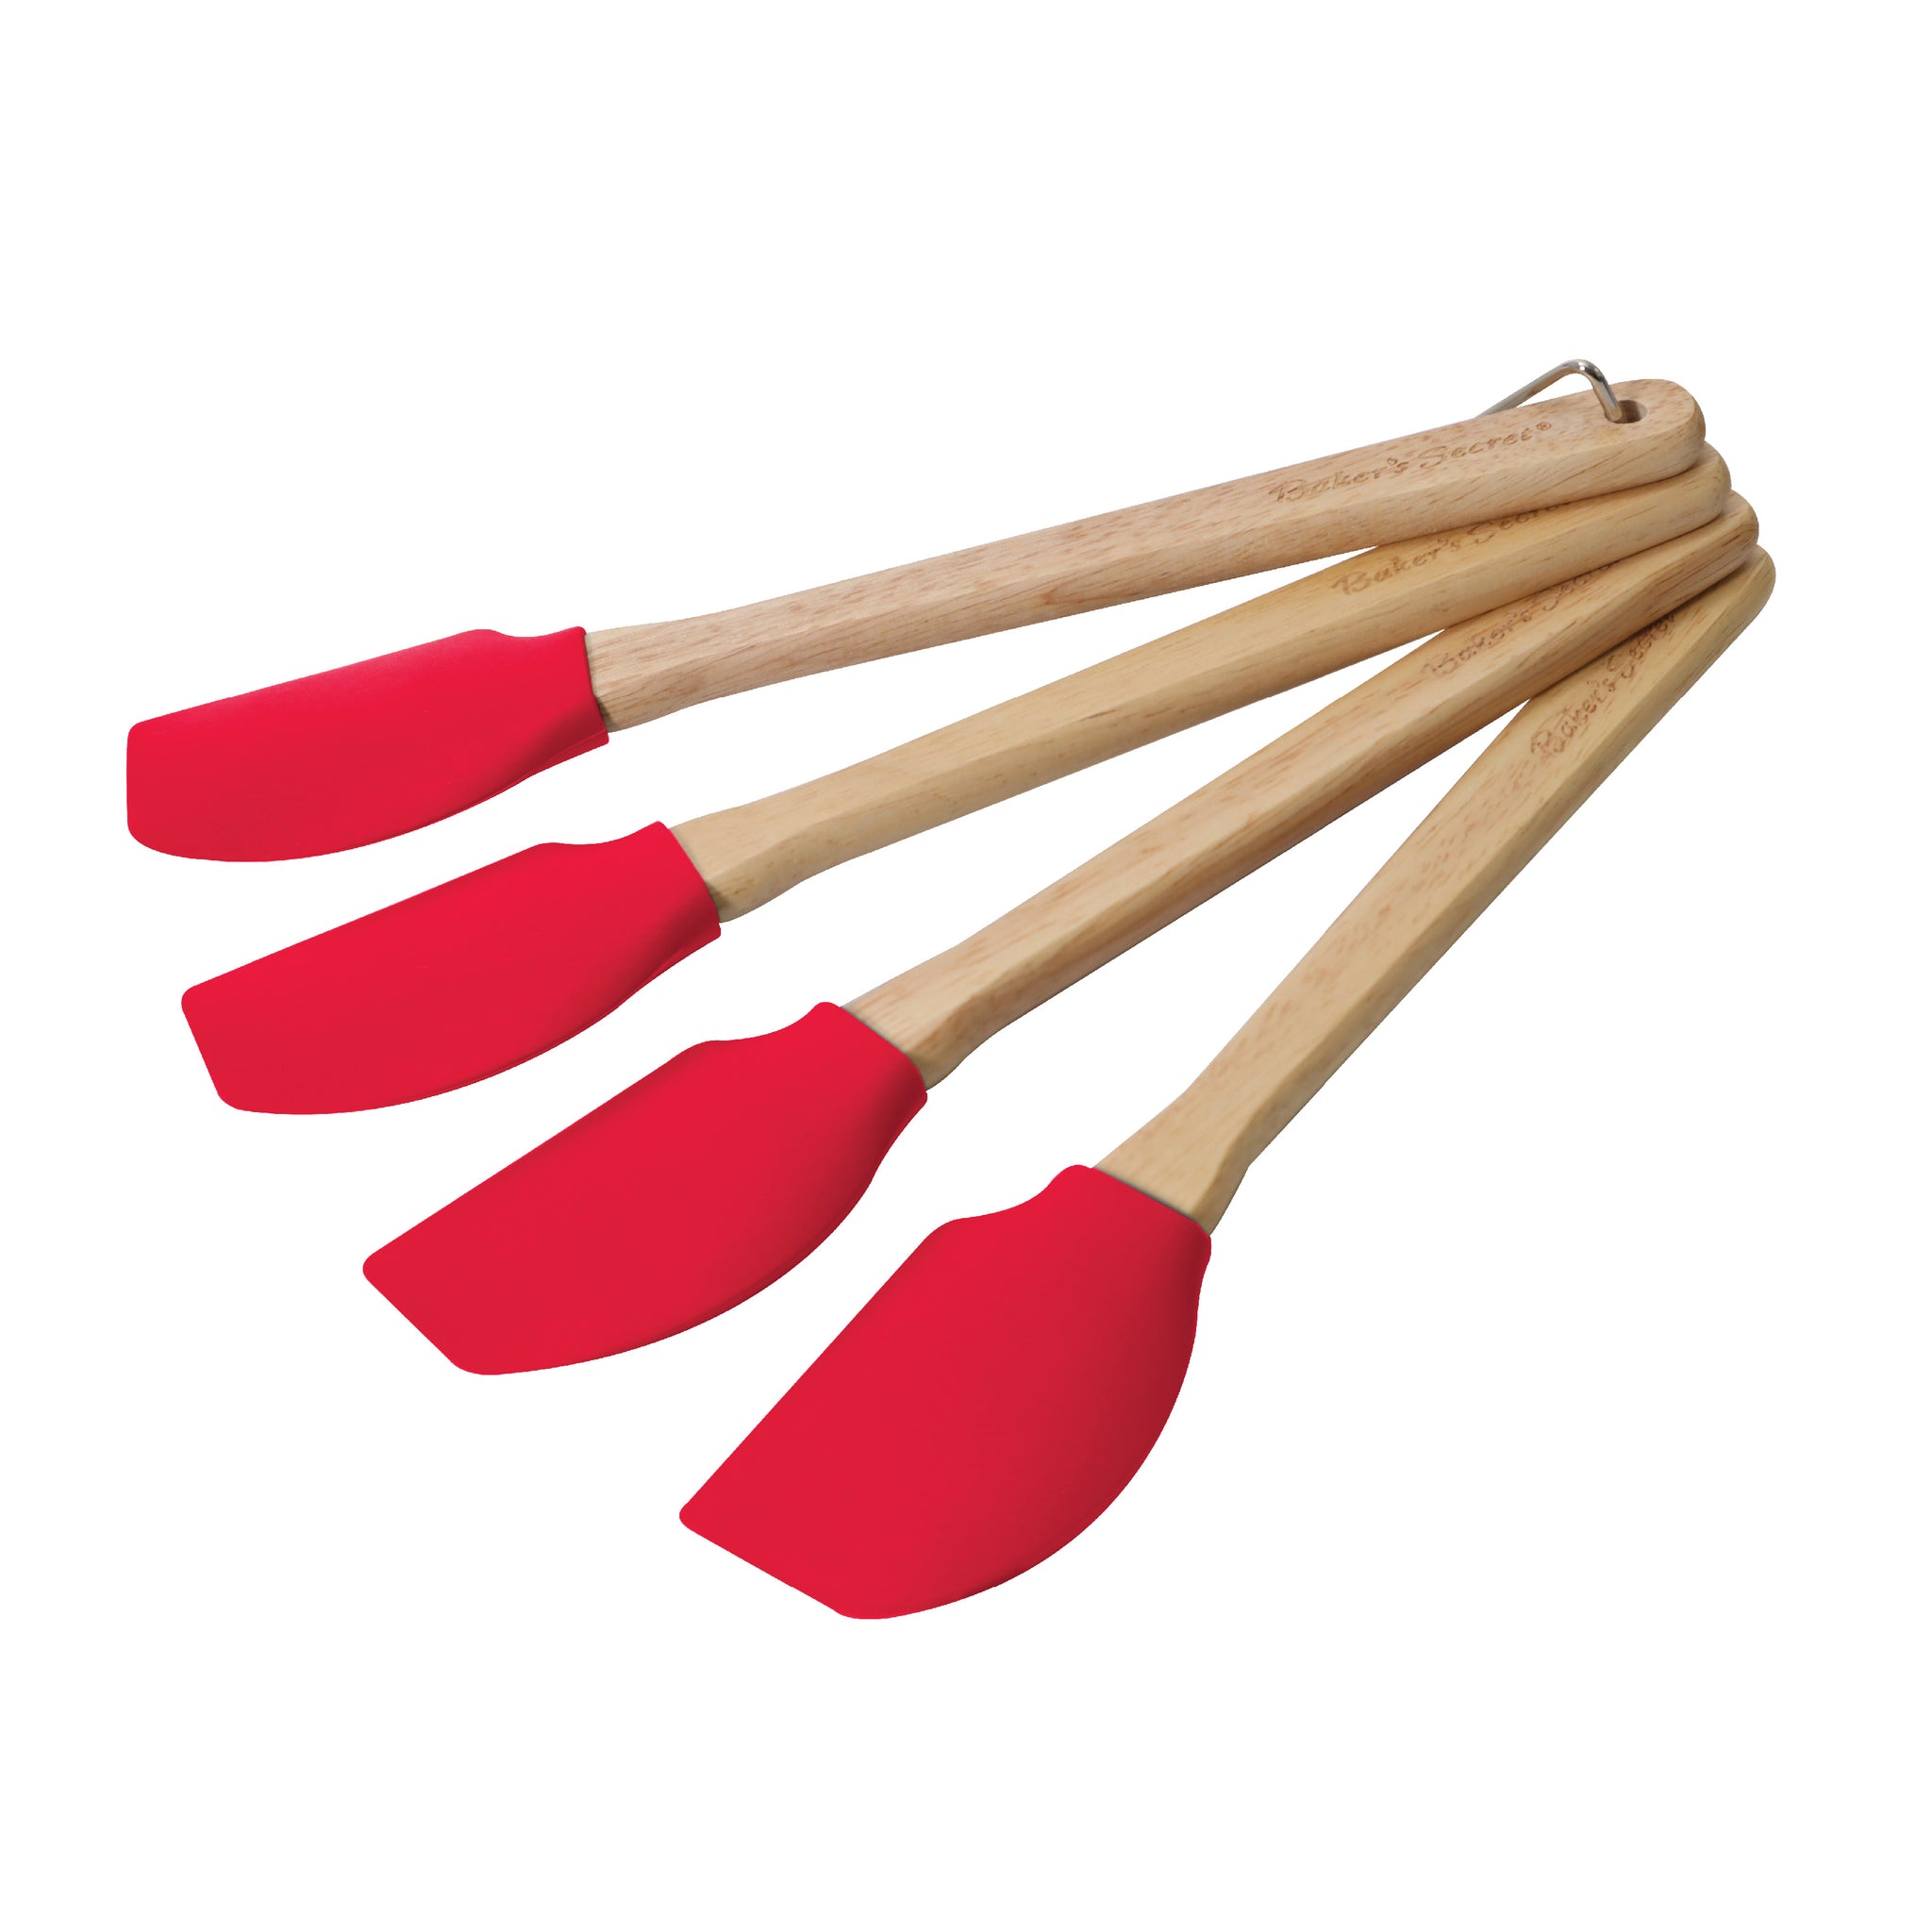 12" Silicone Spatula Set of 4 Red Cookware Accessories - Baker's Secret